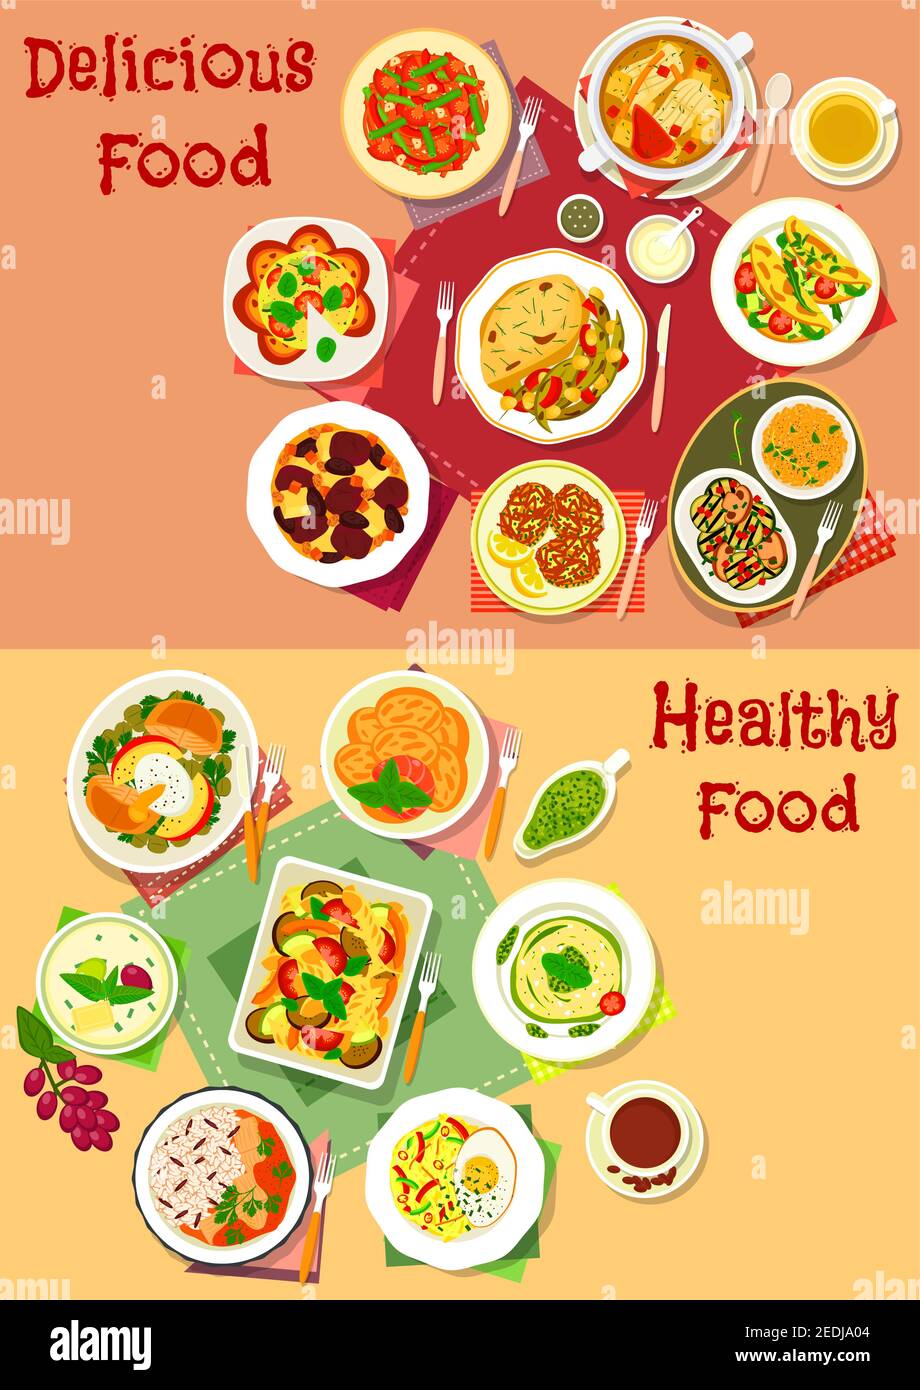 Lunch with fruit dessert icon with vegetable and pasta casserole, beef stew, baked fish and turkey, grilled veggies, lentil and vegetable salad with f Stock Vector